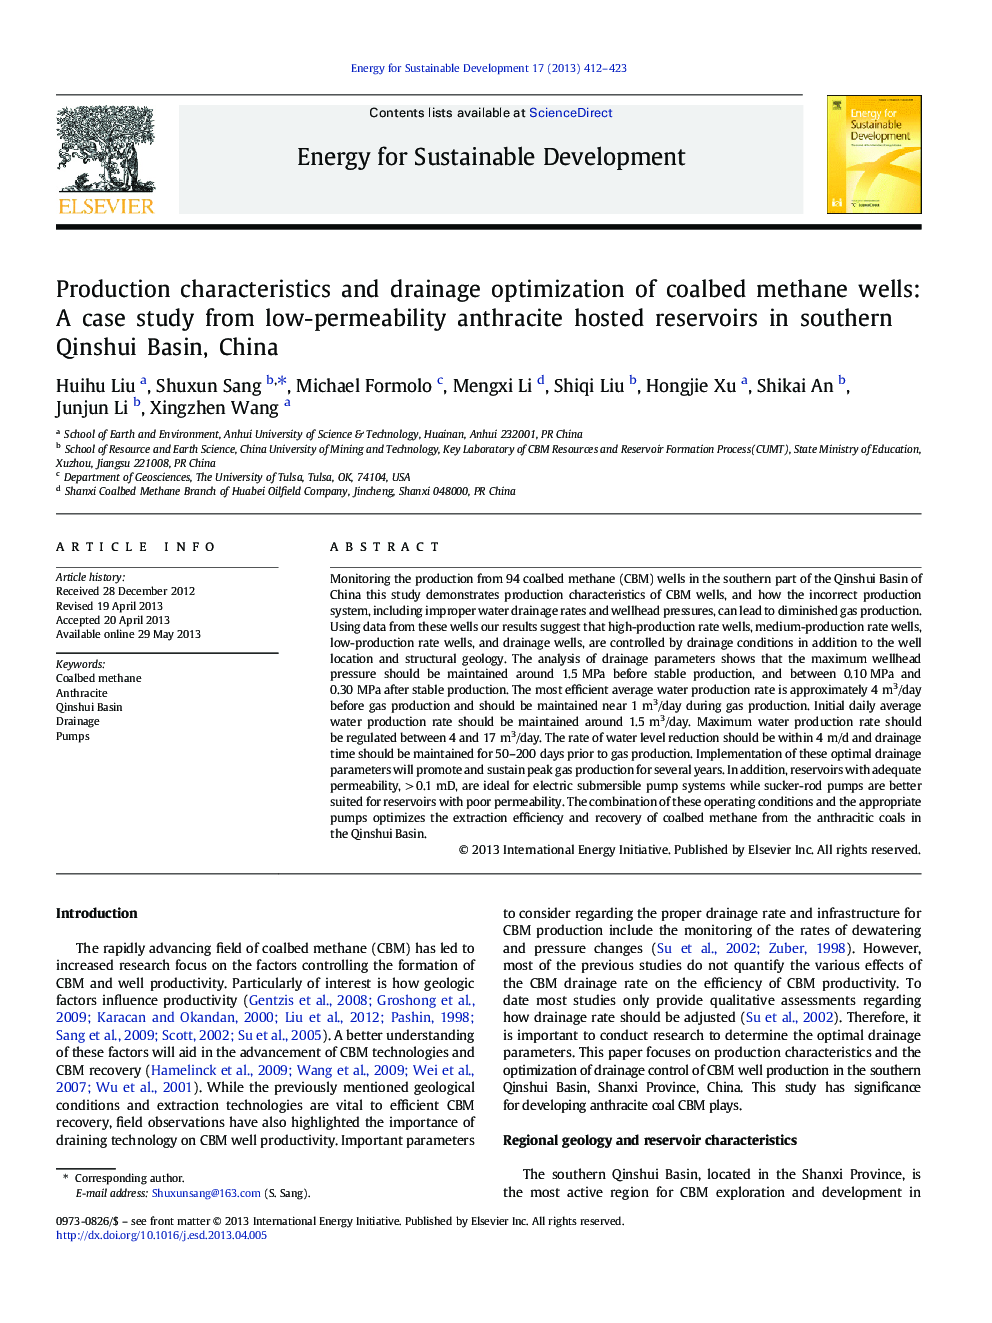 Production characteristics and drainage optimization of coalbed methane wells: A case study from low-permeability anthracite hosted reservoirs in southern Qinshui Basin, China